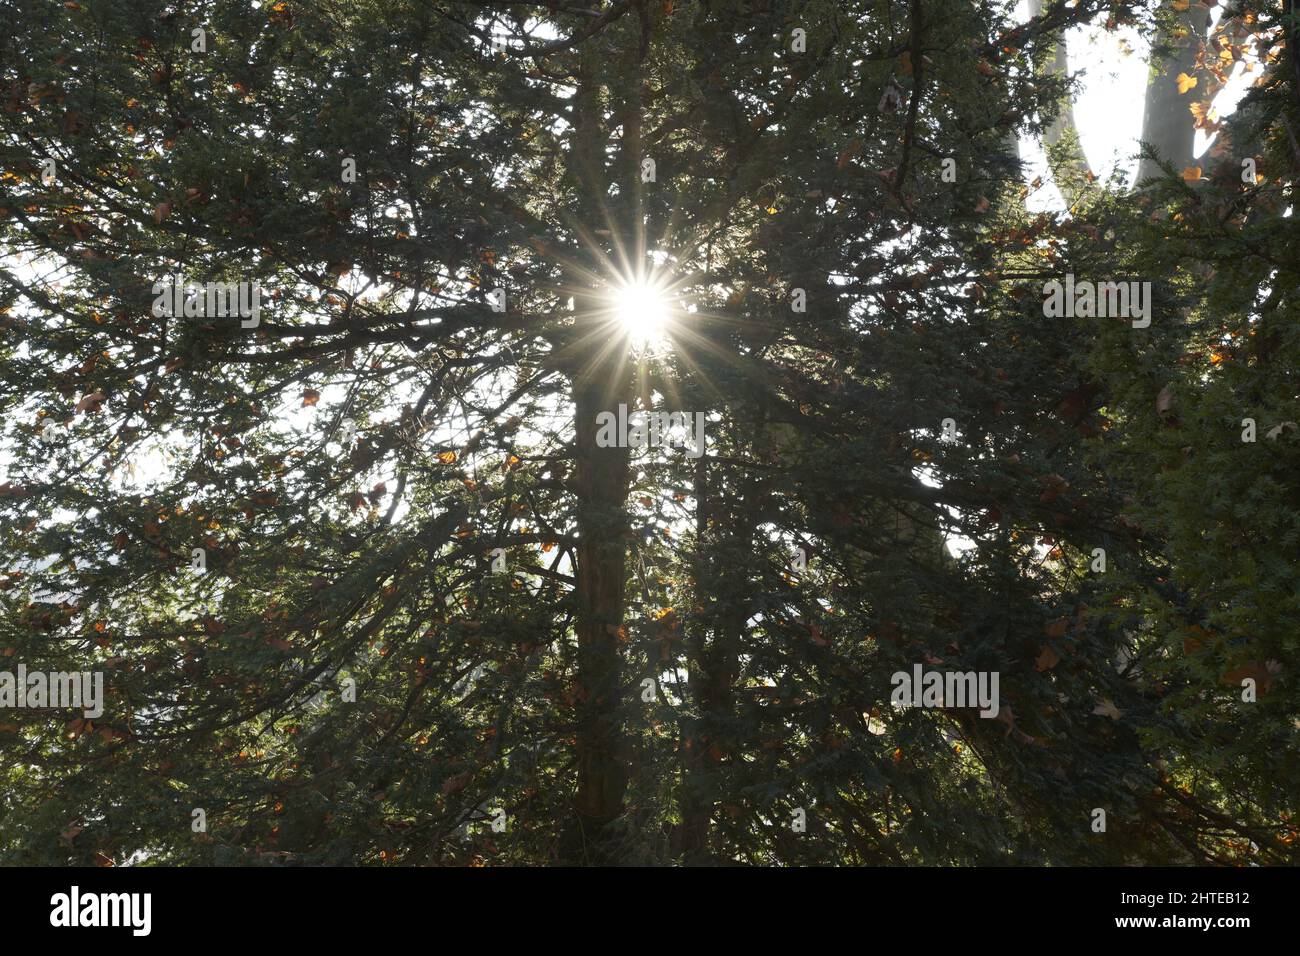 A serene view of the sun shining throgh the branches of trees at dawn Stock Photo